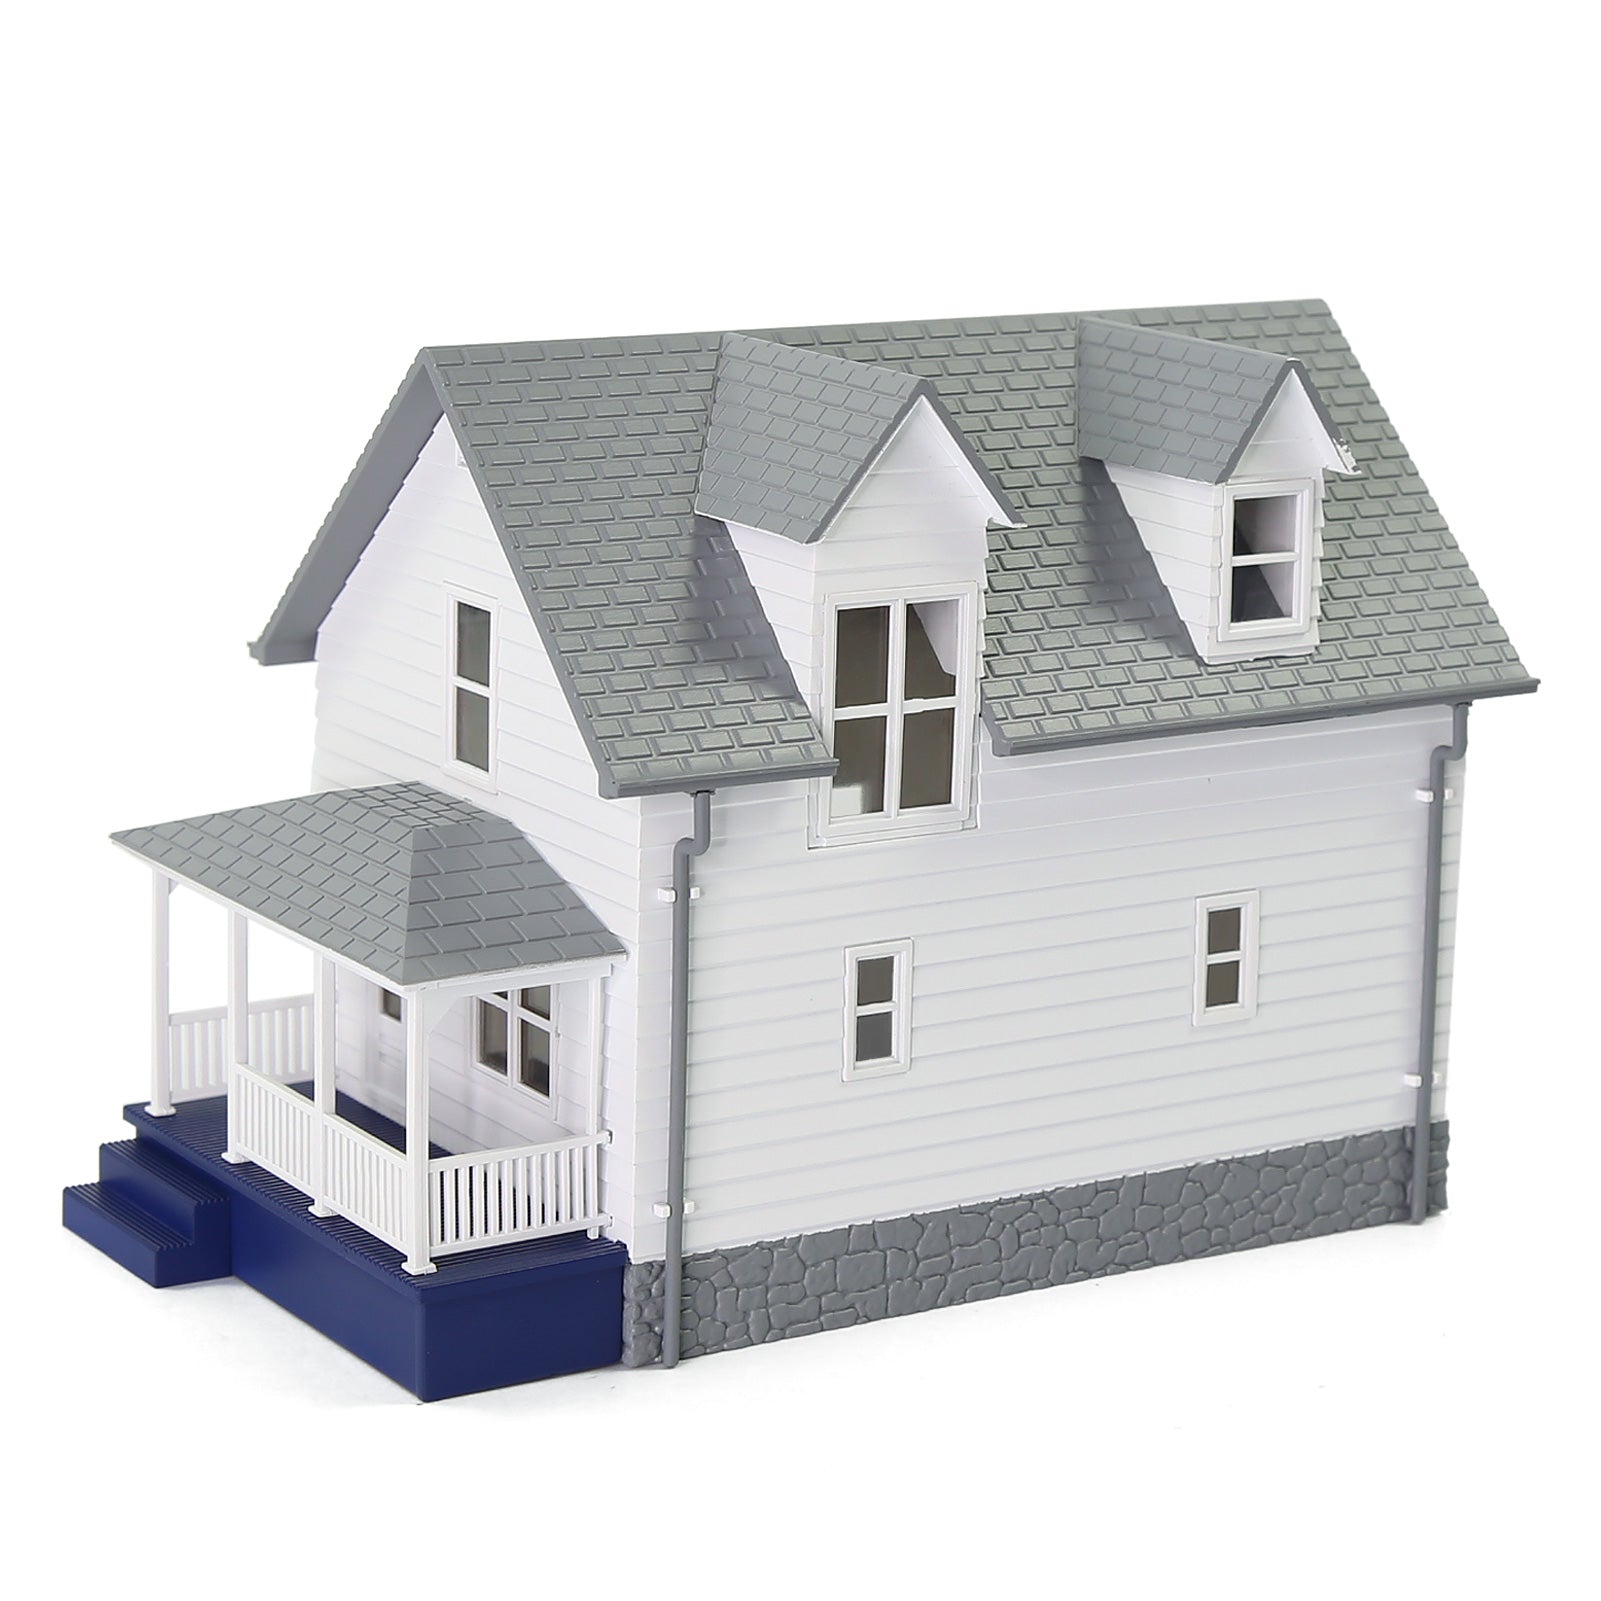 JZN01 1pc N Scale 1:160 Model House Residential Building Architectural